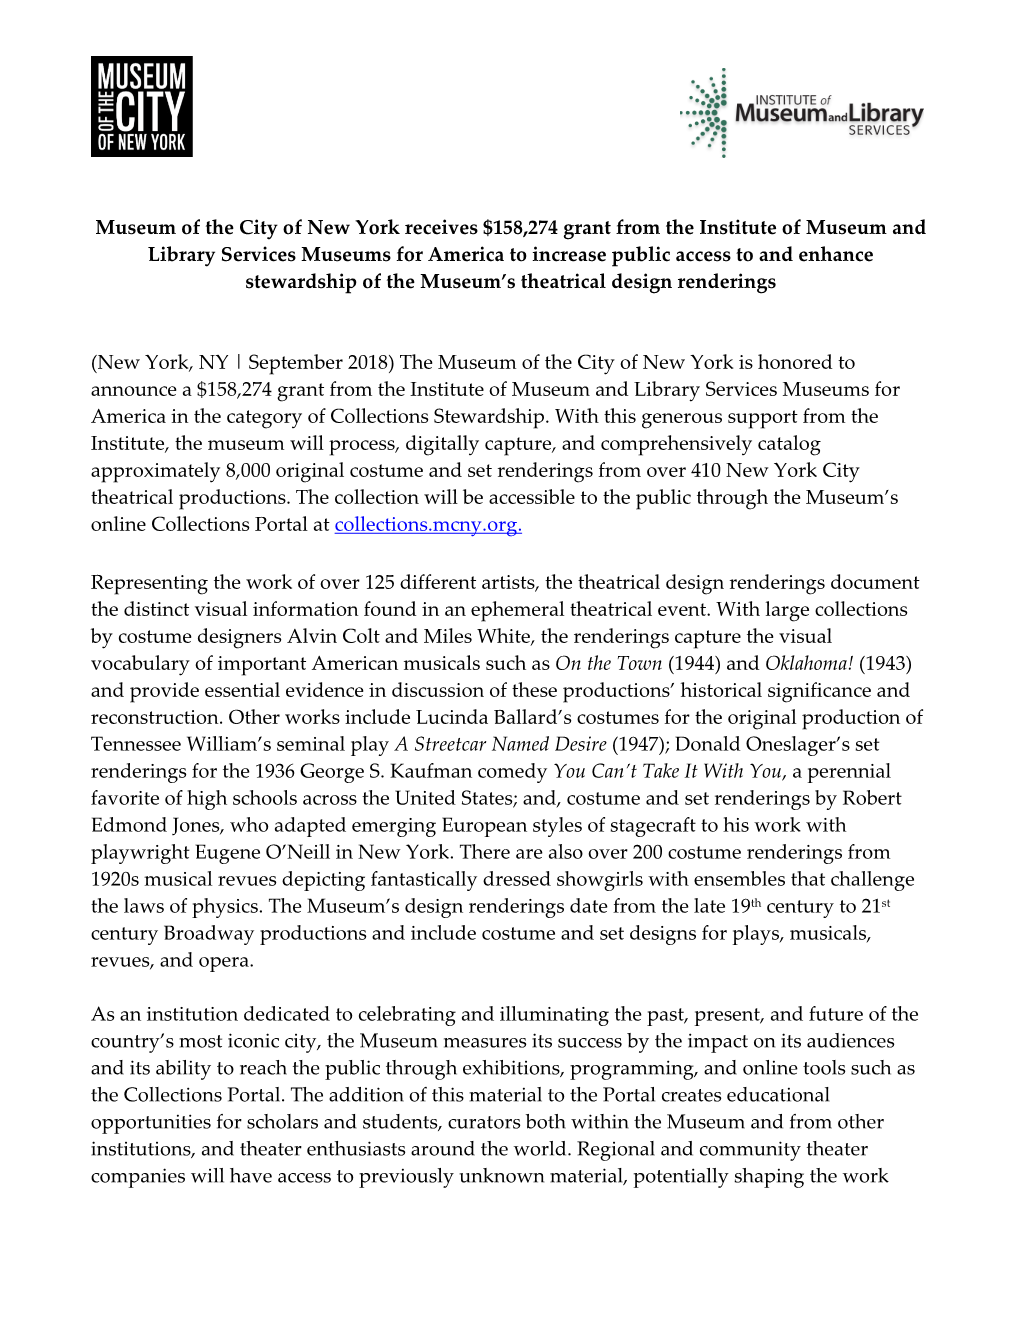 Museum of the City of New York Receives $158,274 Grant from The